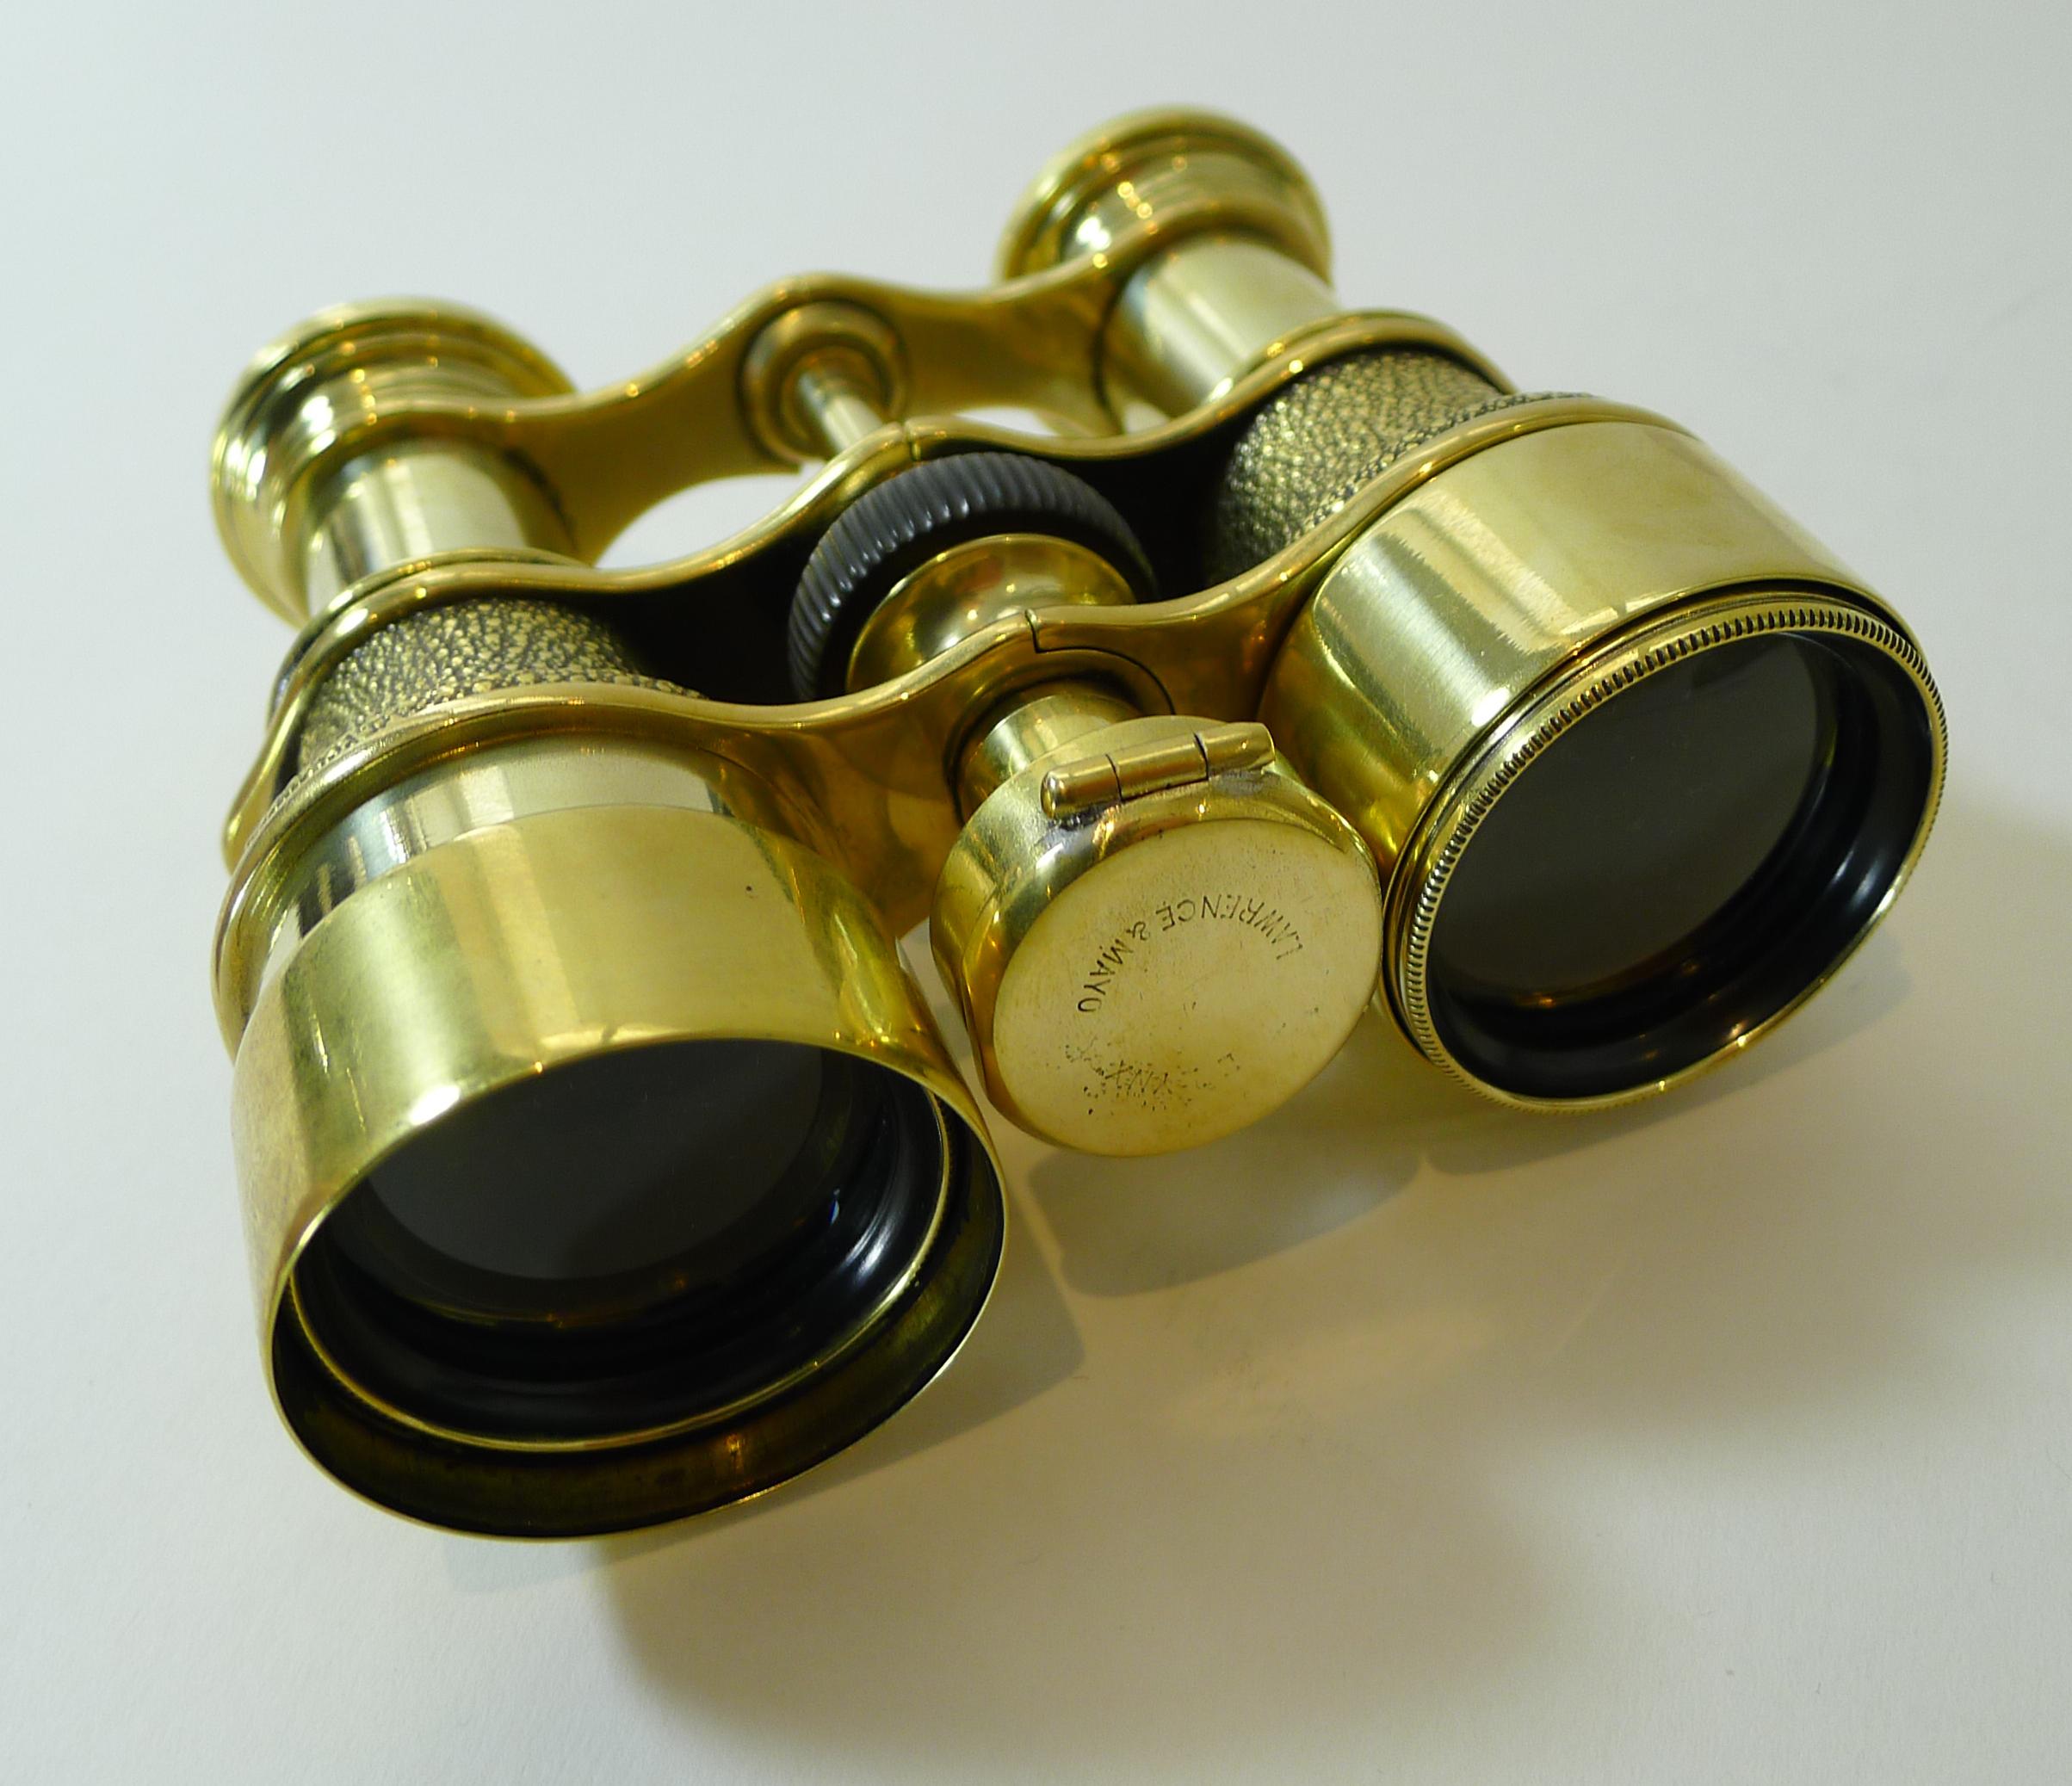 Edwardian Antique English Field Glasses / Binoculars by Lawrence and Mayo, with Compass